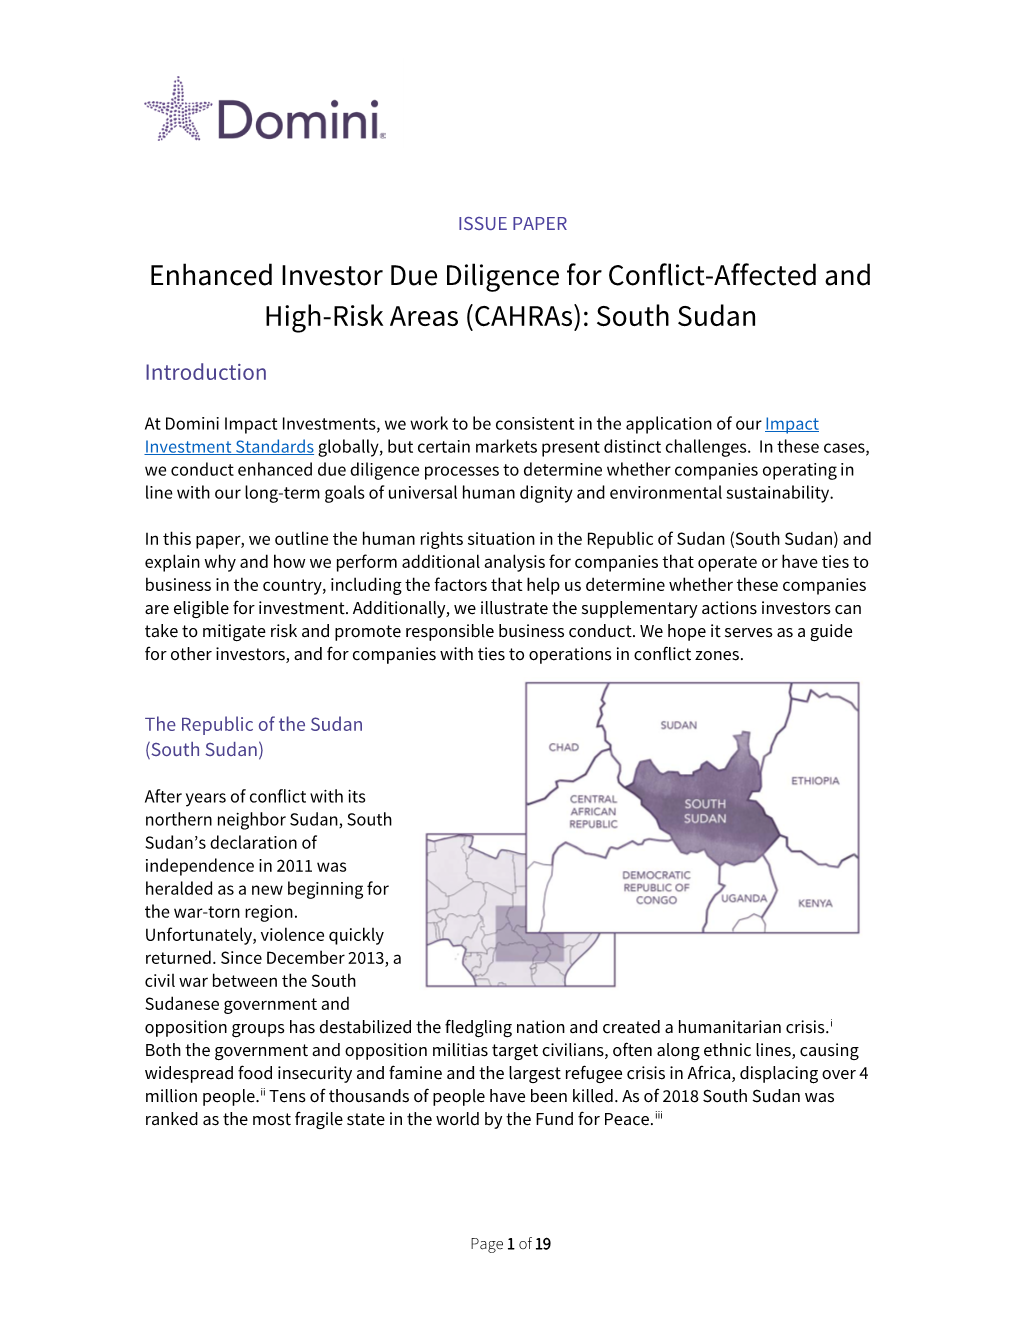 Enhanced Investor Due Diligence for Conflict-Affected and High-Risk Areas (Cahras): South Sudan